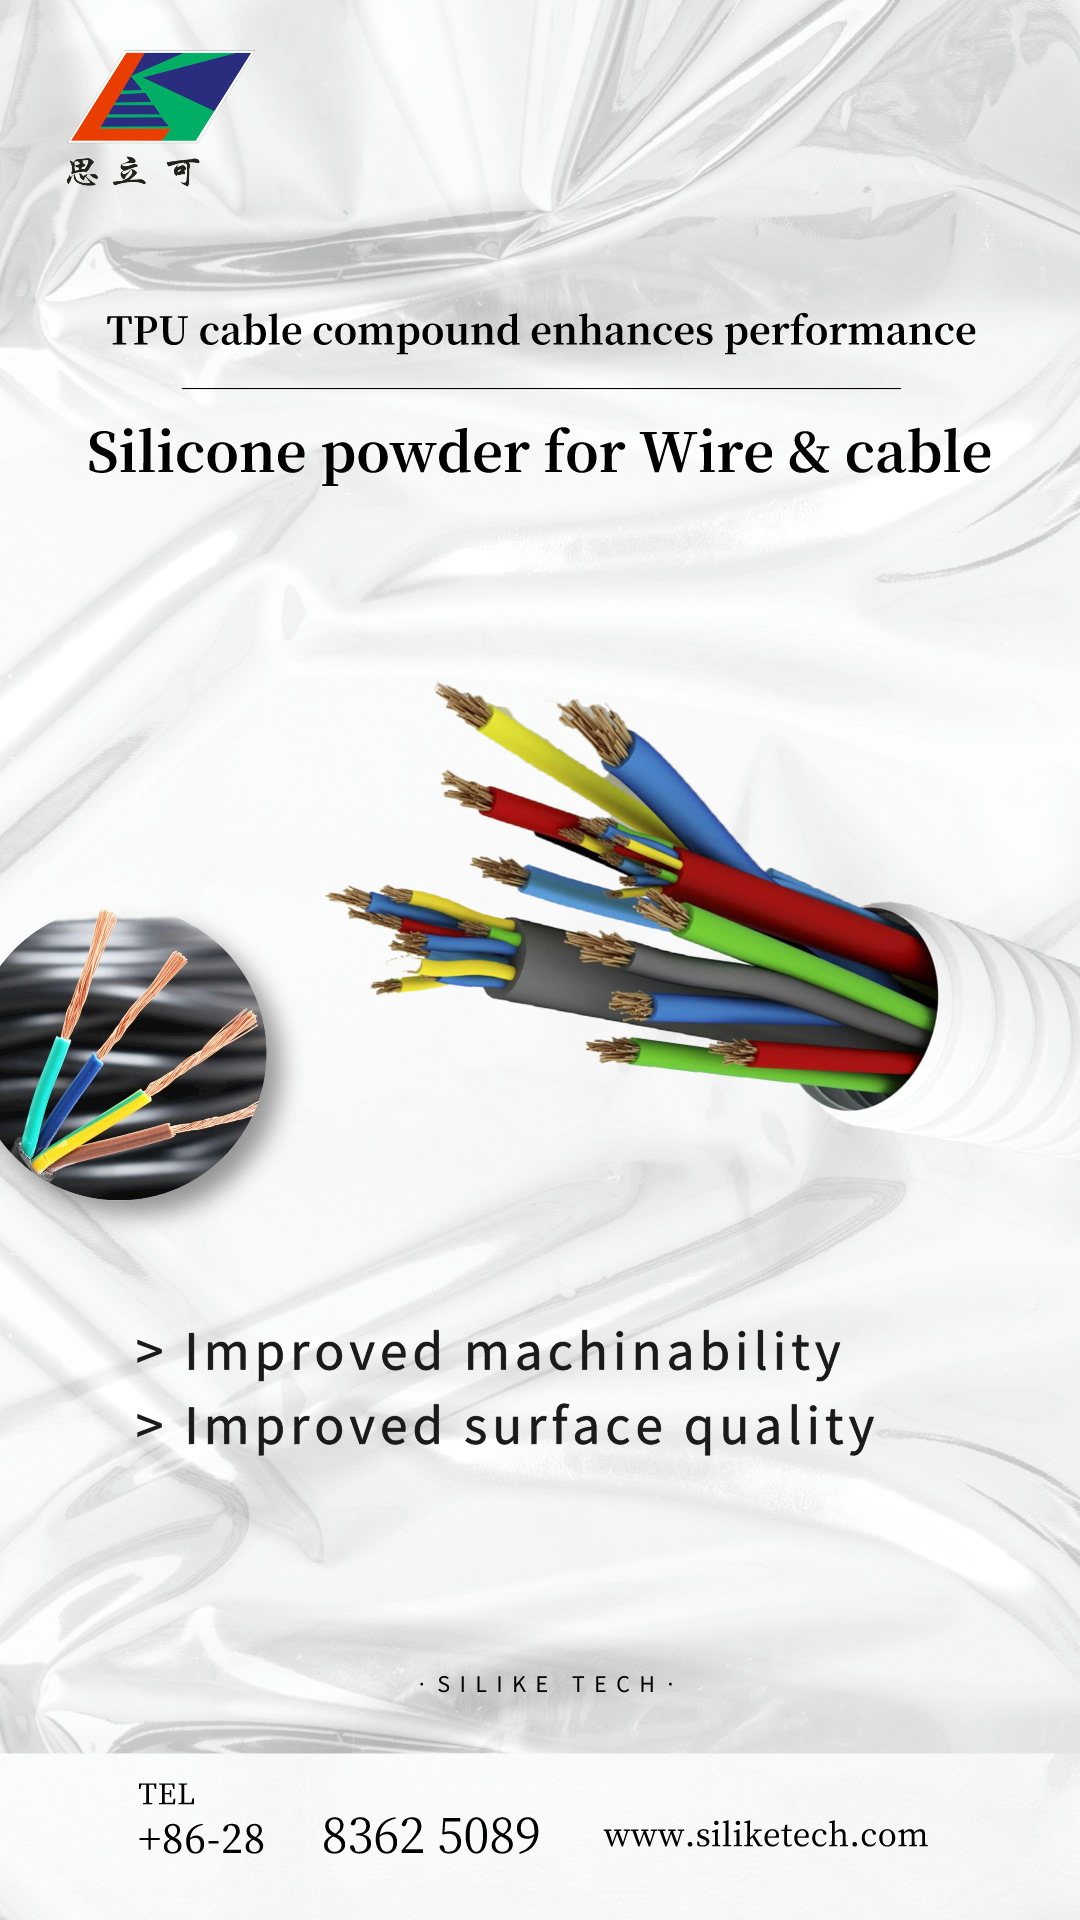 New energy era, how to improve the surface quality of TPU cable material.